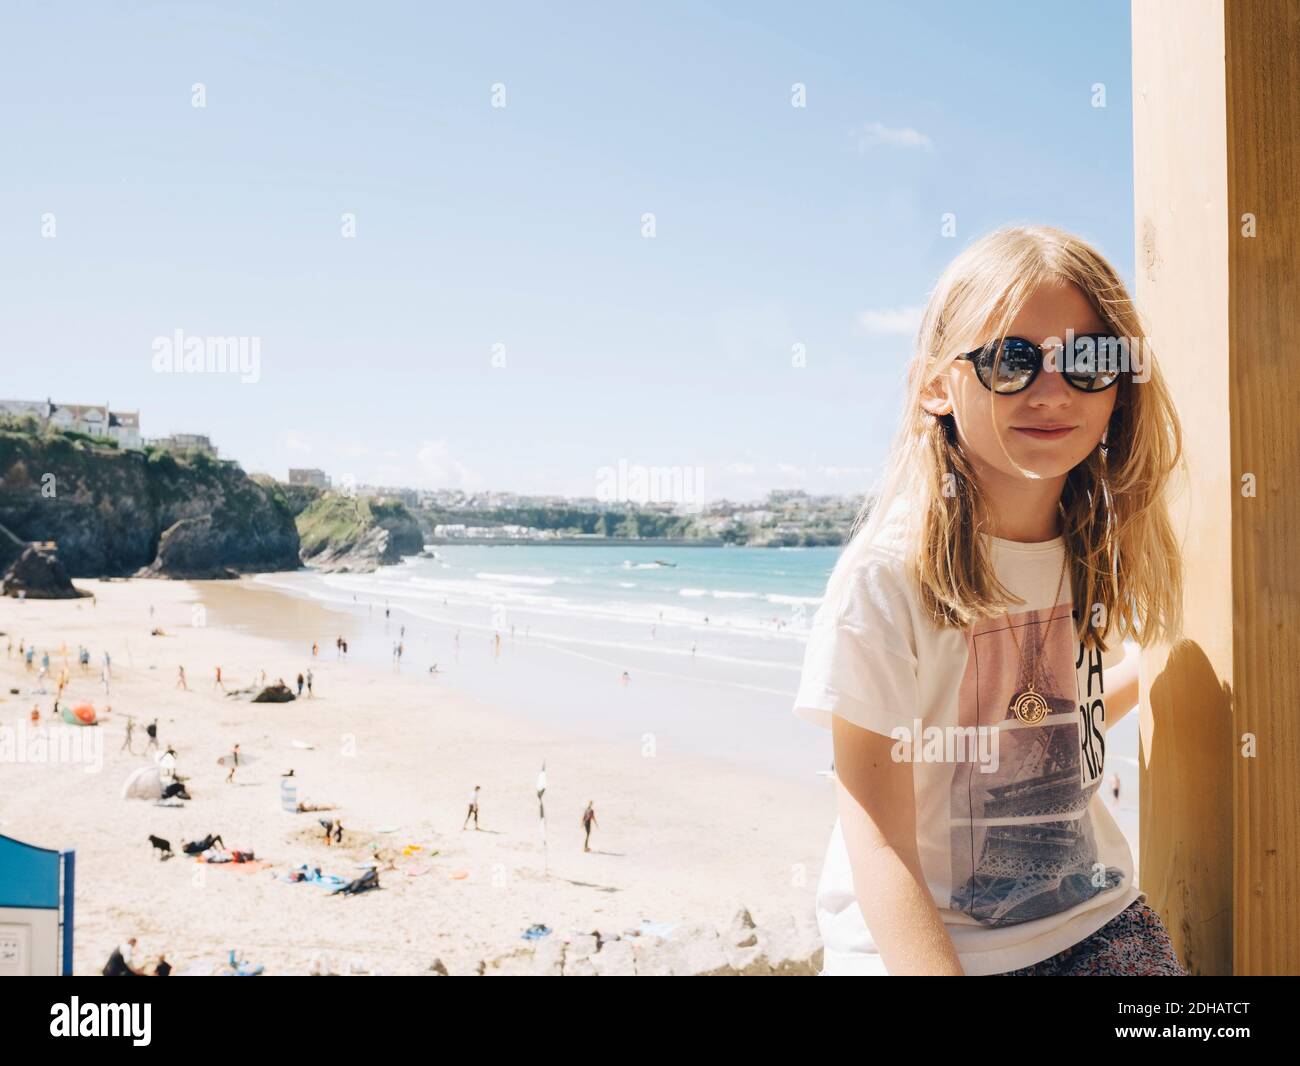 Blond girl sitting by wooden column at beach against sky on sunny day Stock Photo